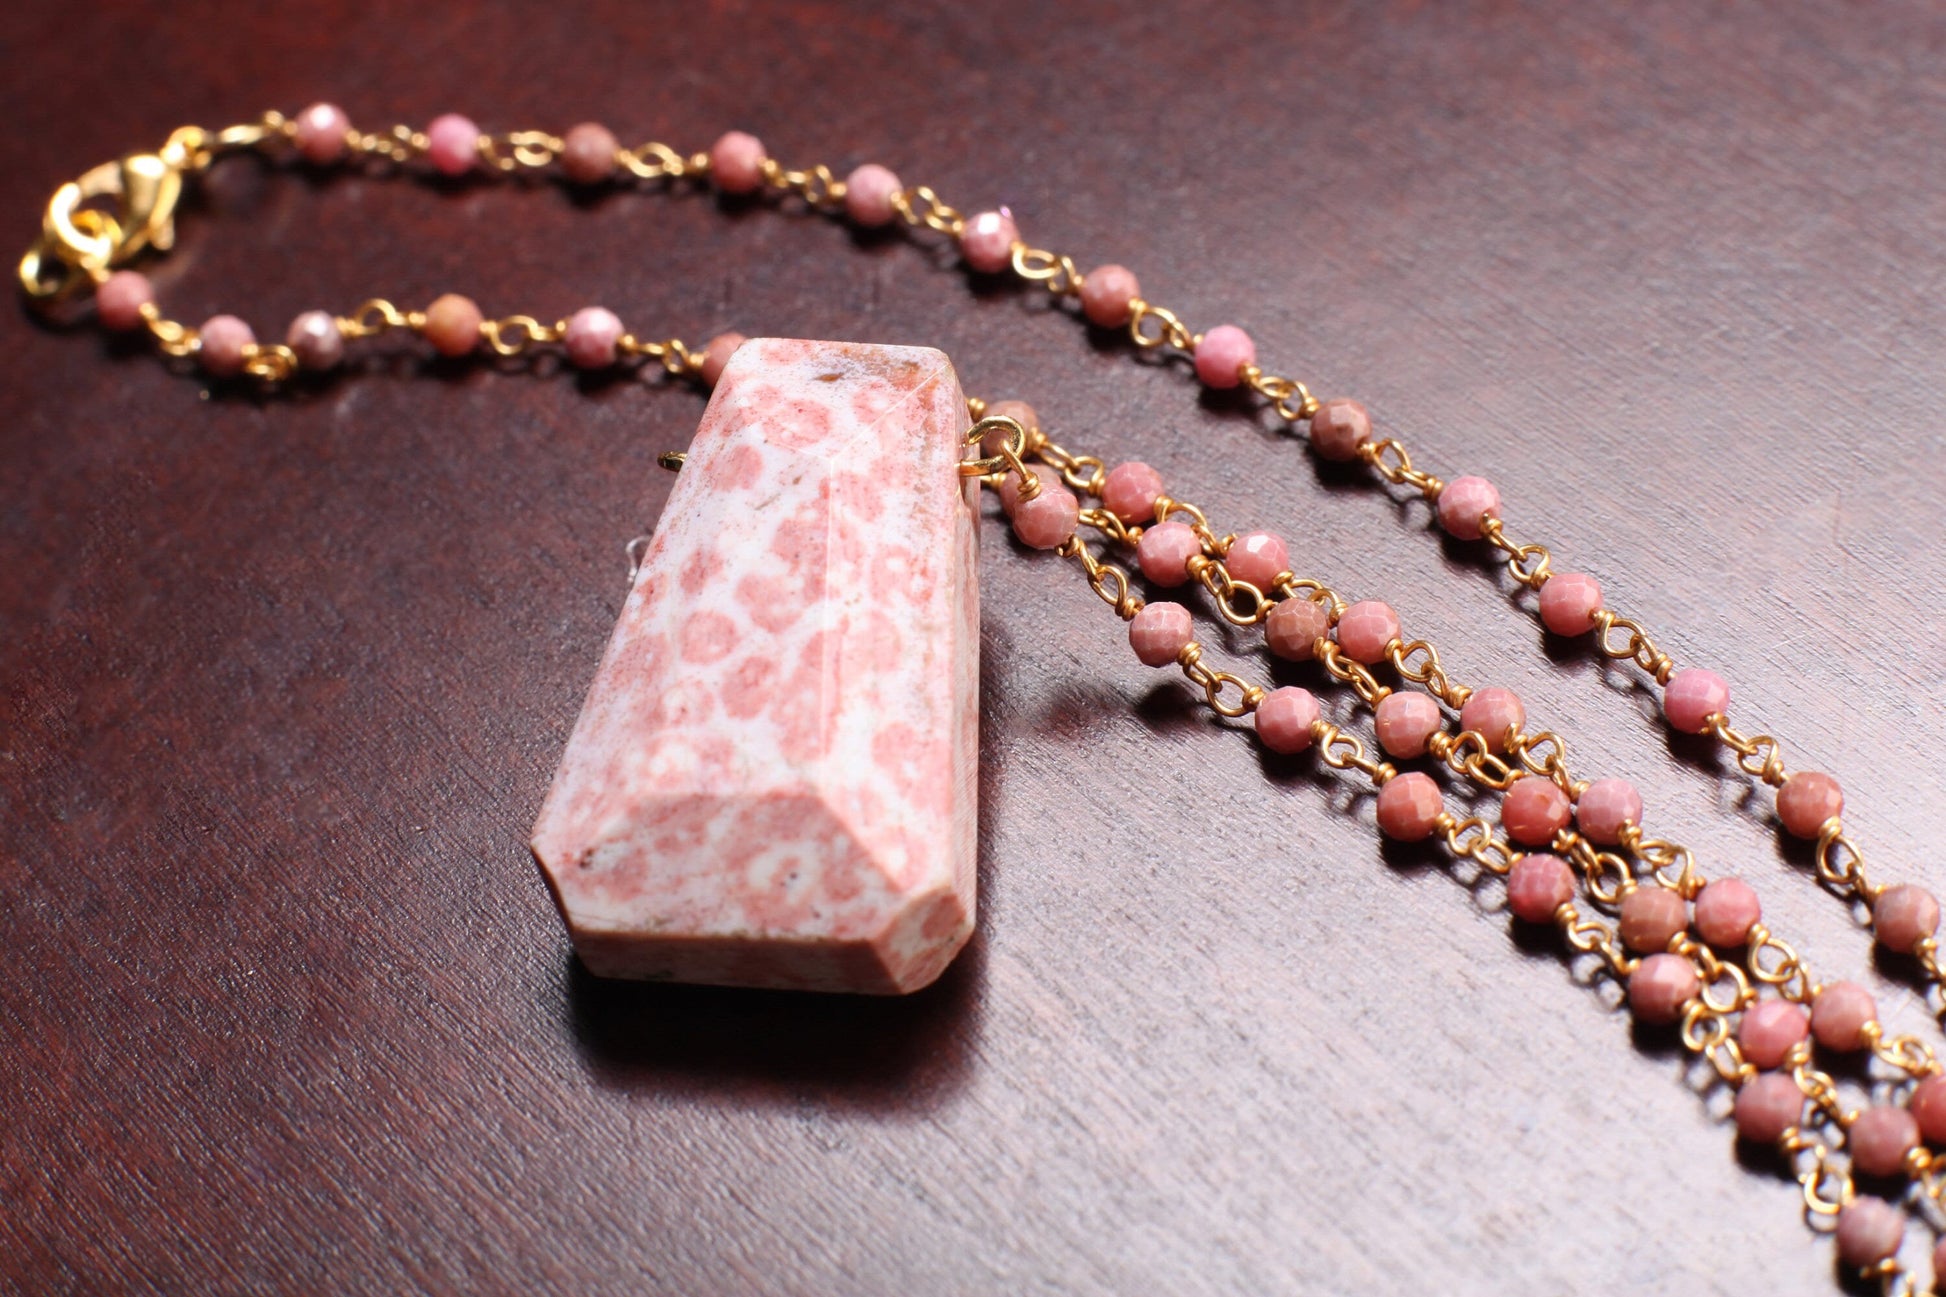 Opal Faceted Trapezoid Gemstone Pendant with Pink Rhodonite Wire Wrapped Gold Chain 20&quot; long Necklace, Natural Gemstone Gift